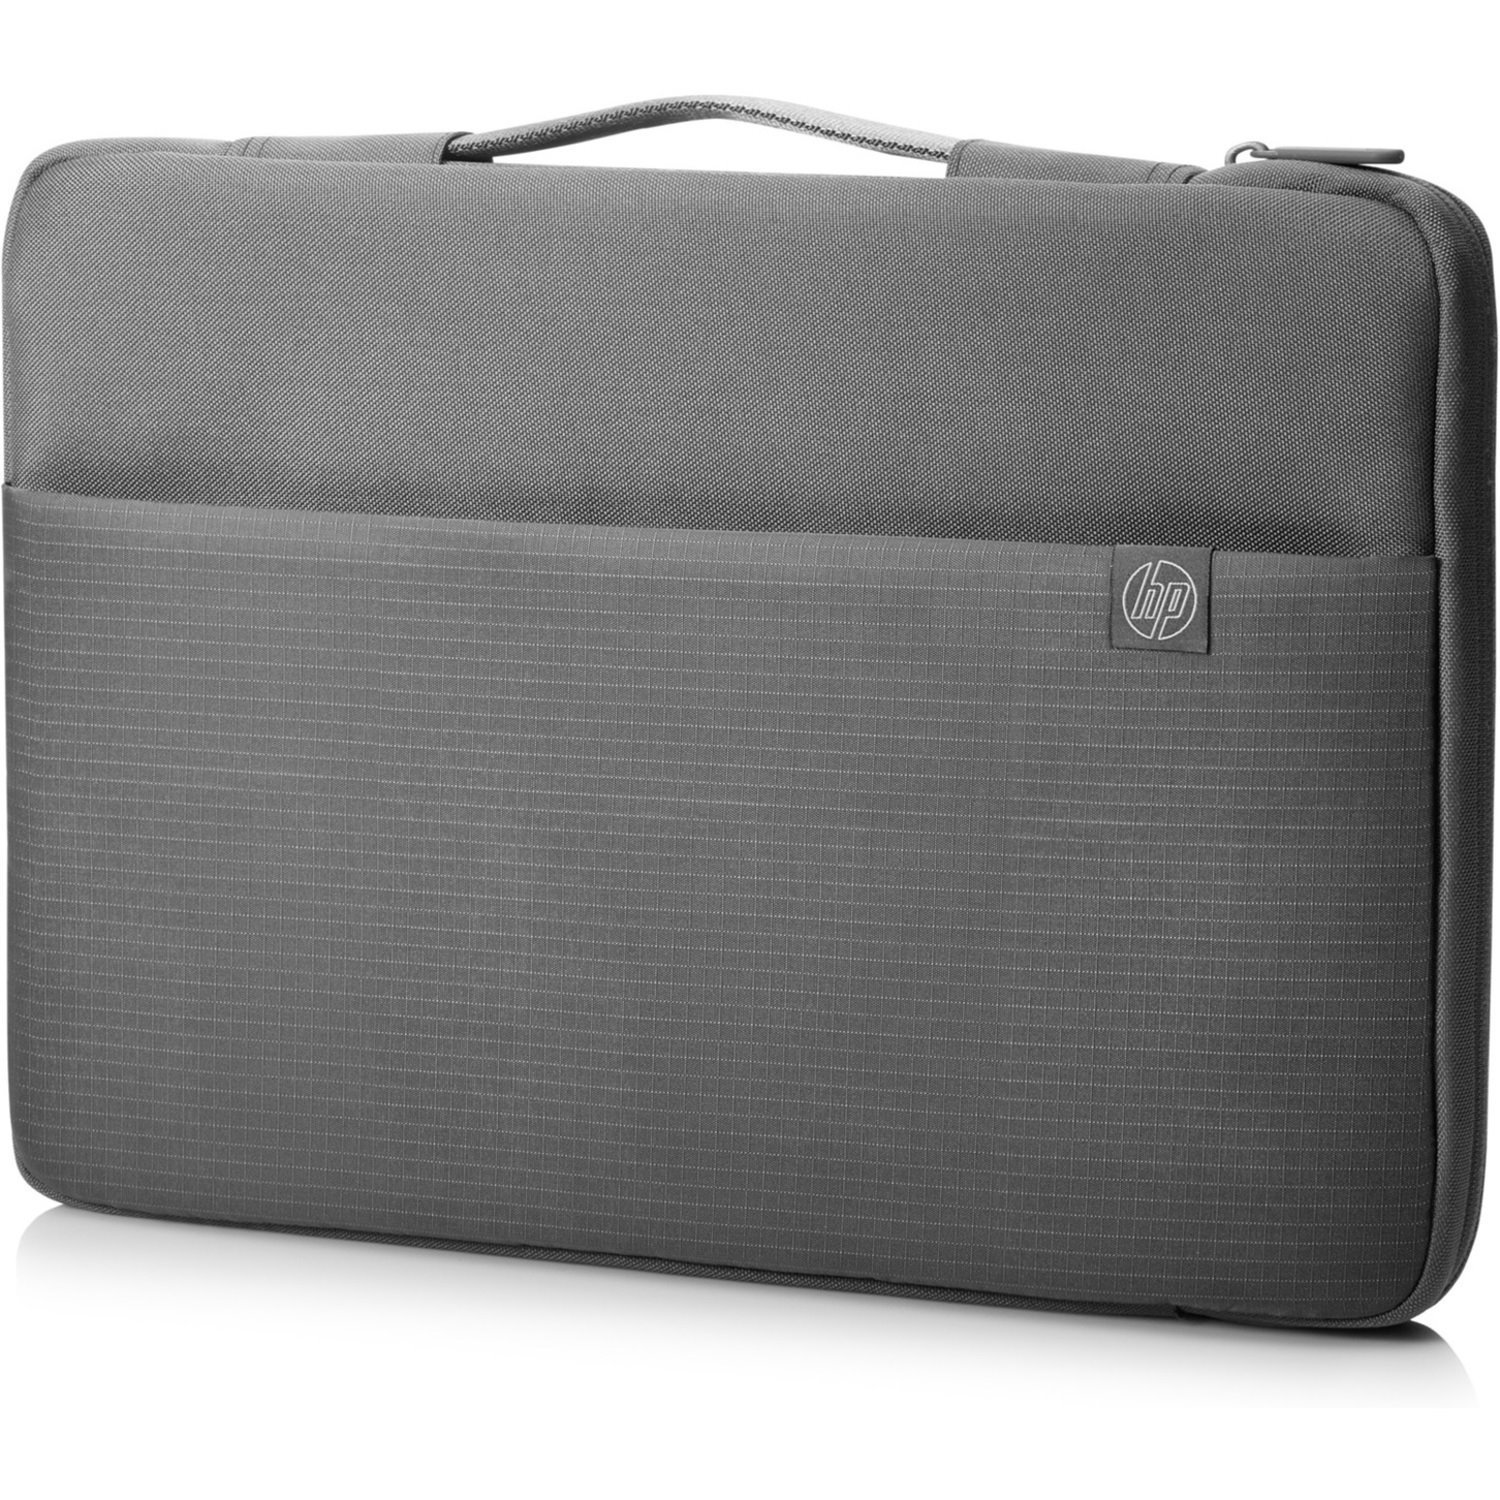 HP Carrying Case (Sleeve) for 15.6" Notebook - Gray